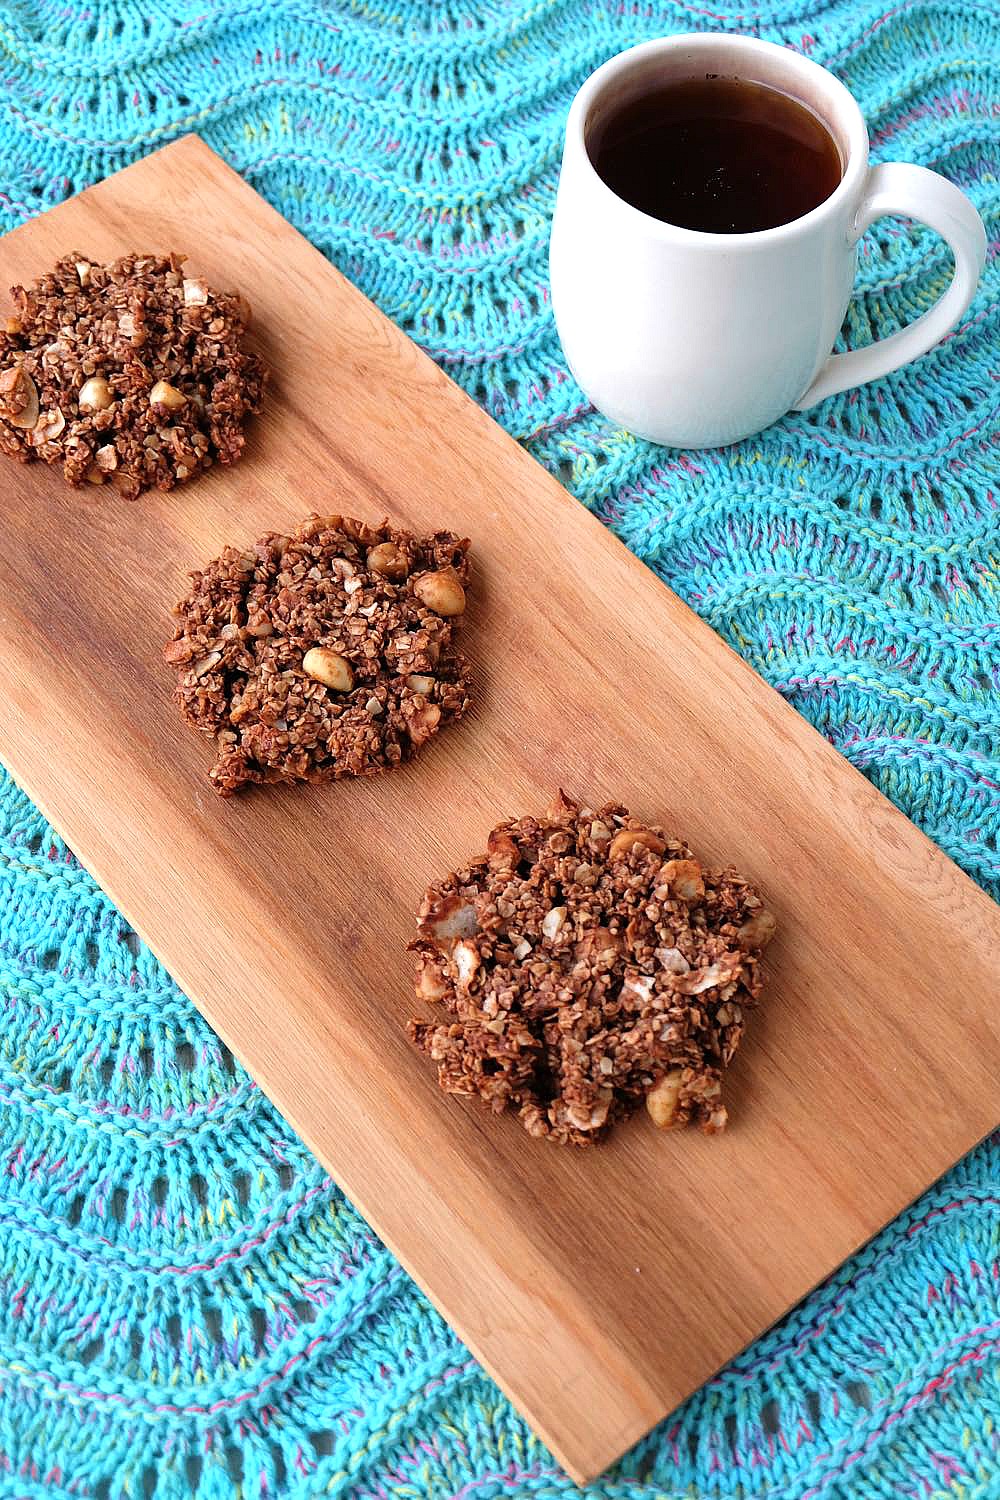 Looking for a delicious, easy and healthy breakfast idea? This chocolate coconut macadamia nut healthy breakfast cookies recipe is a delicious and guilt free way to start the day! Perfect for breakfast on the go, its gluten free, low in sugar, dairy free and packed with superfoods like raw cacao and flax seeds! Freeze extras for breakfast meal planning! 